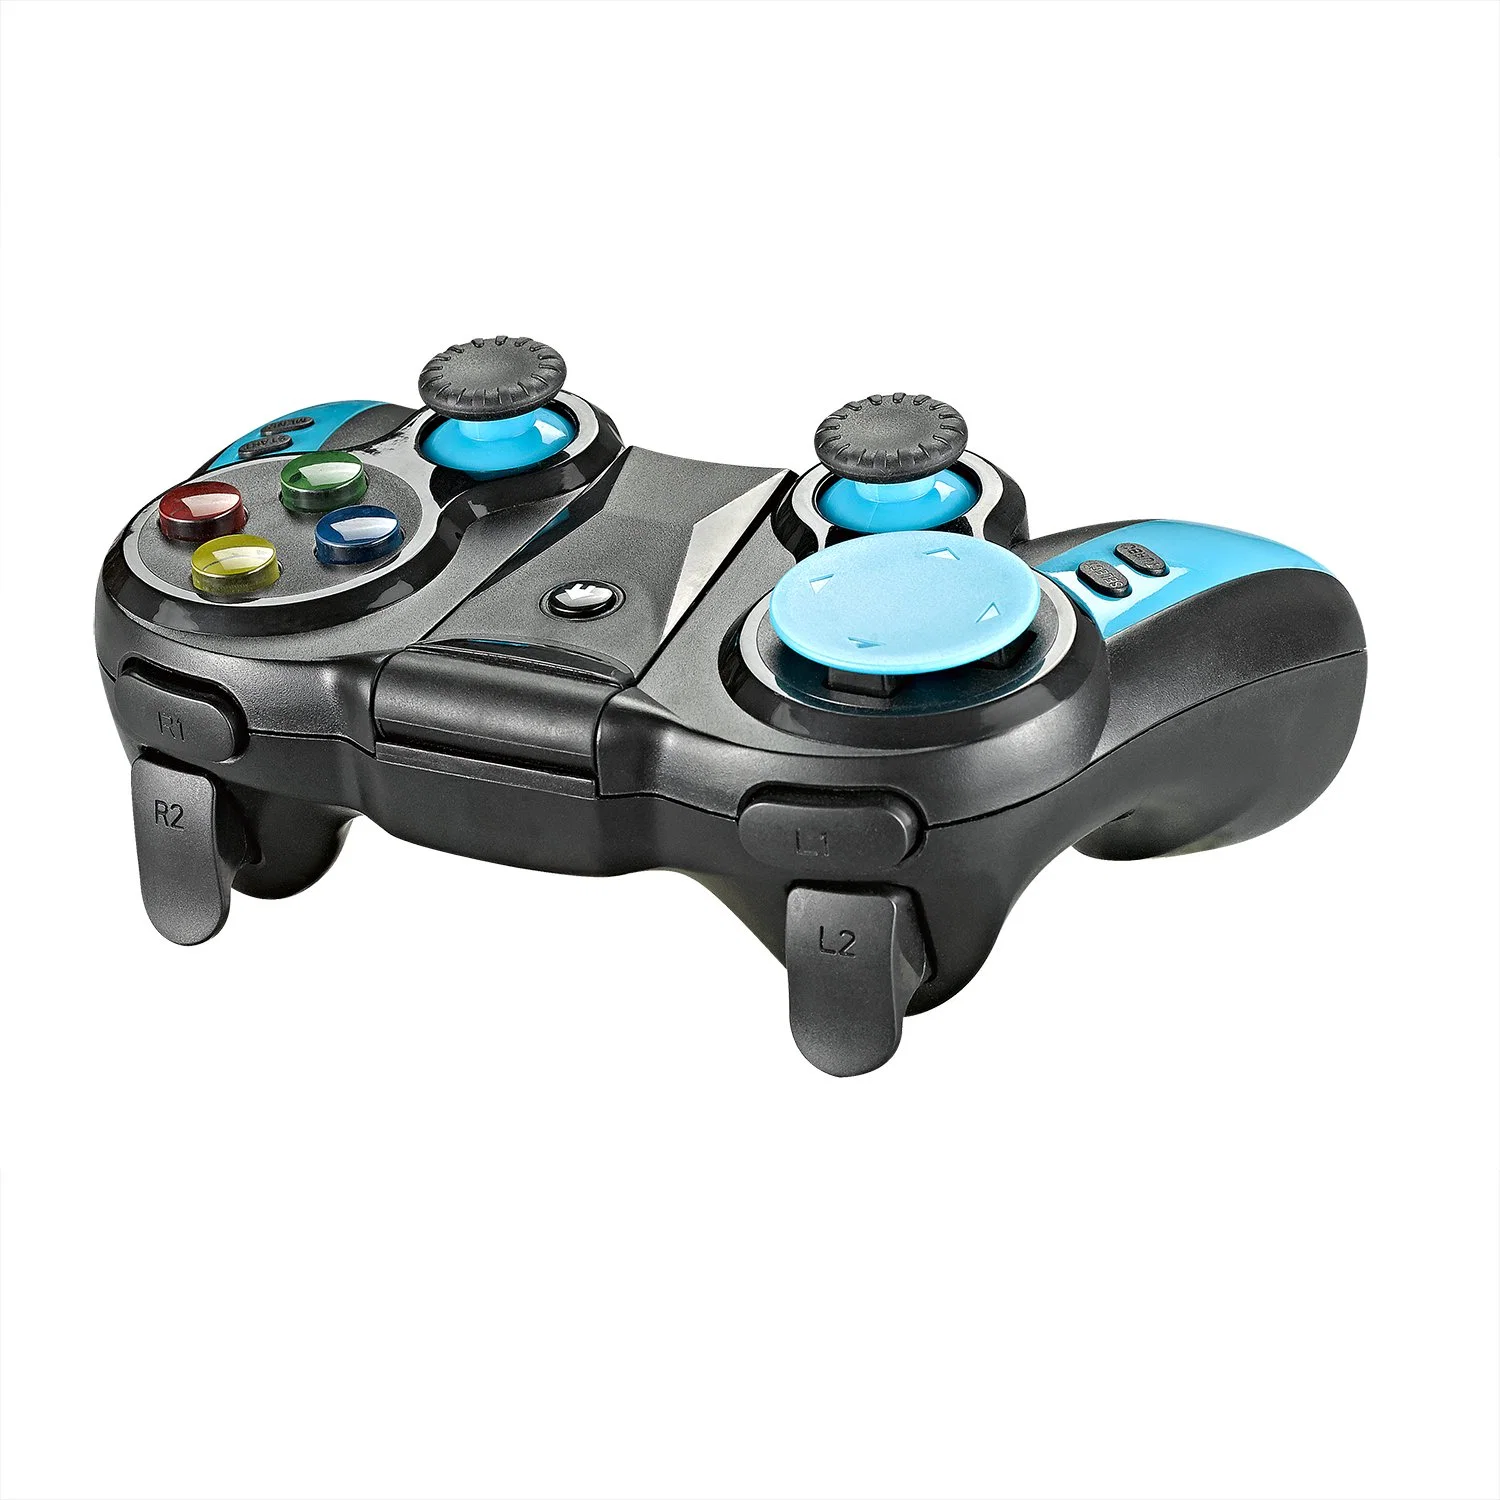 Senze Android/Ios Game Console for Smart TV, iPad, Mobile Phone